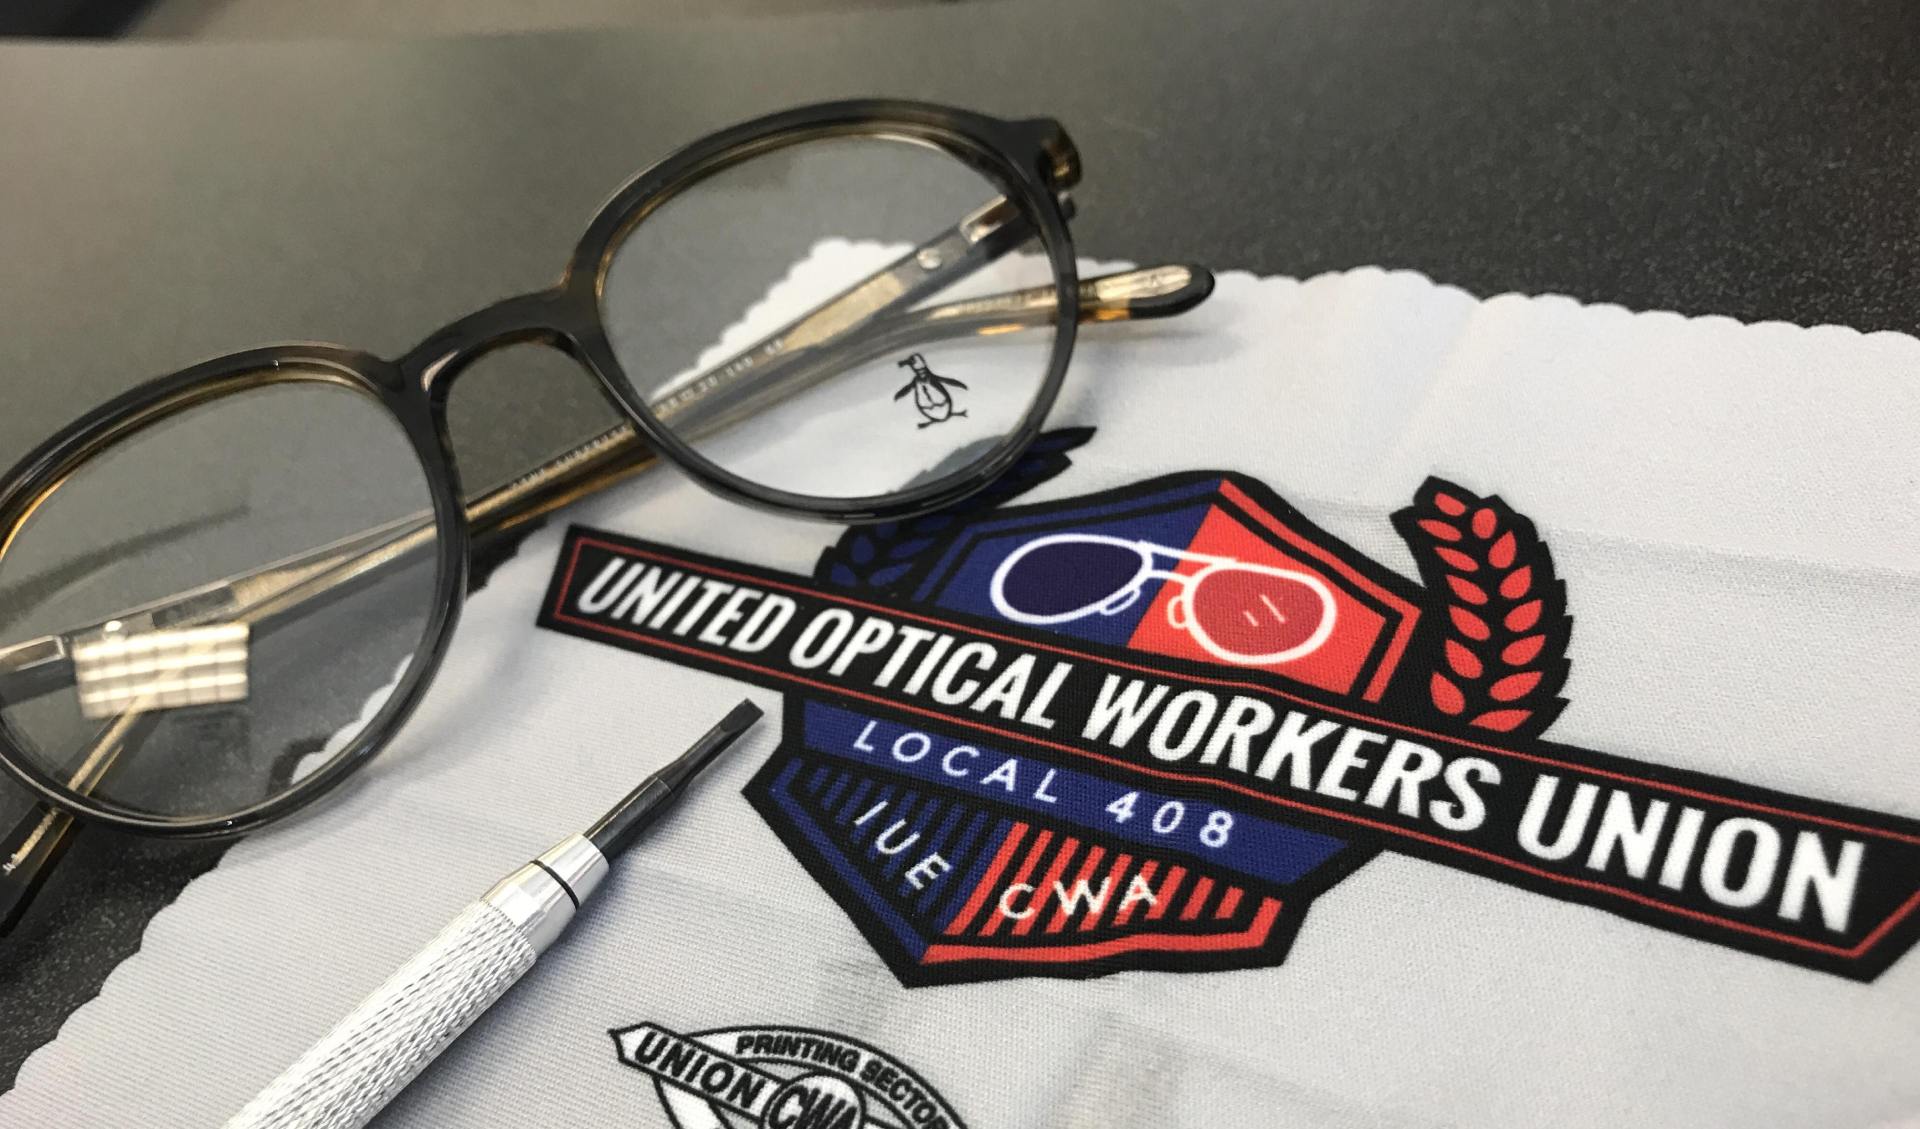 Spectacles on a table with a logo printed on cloth